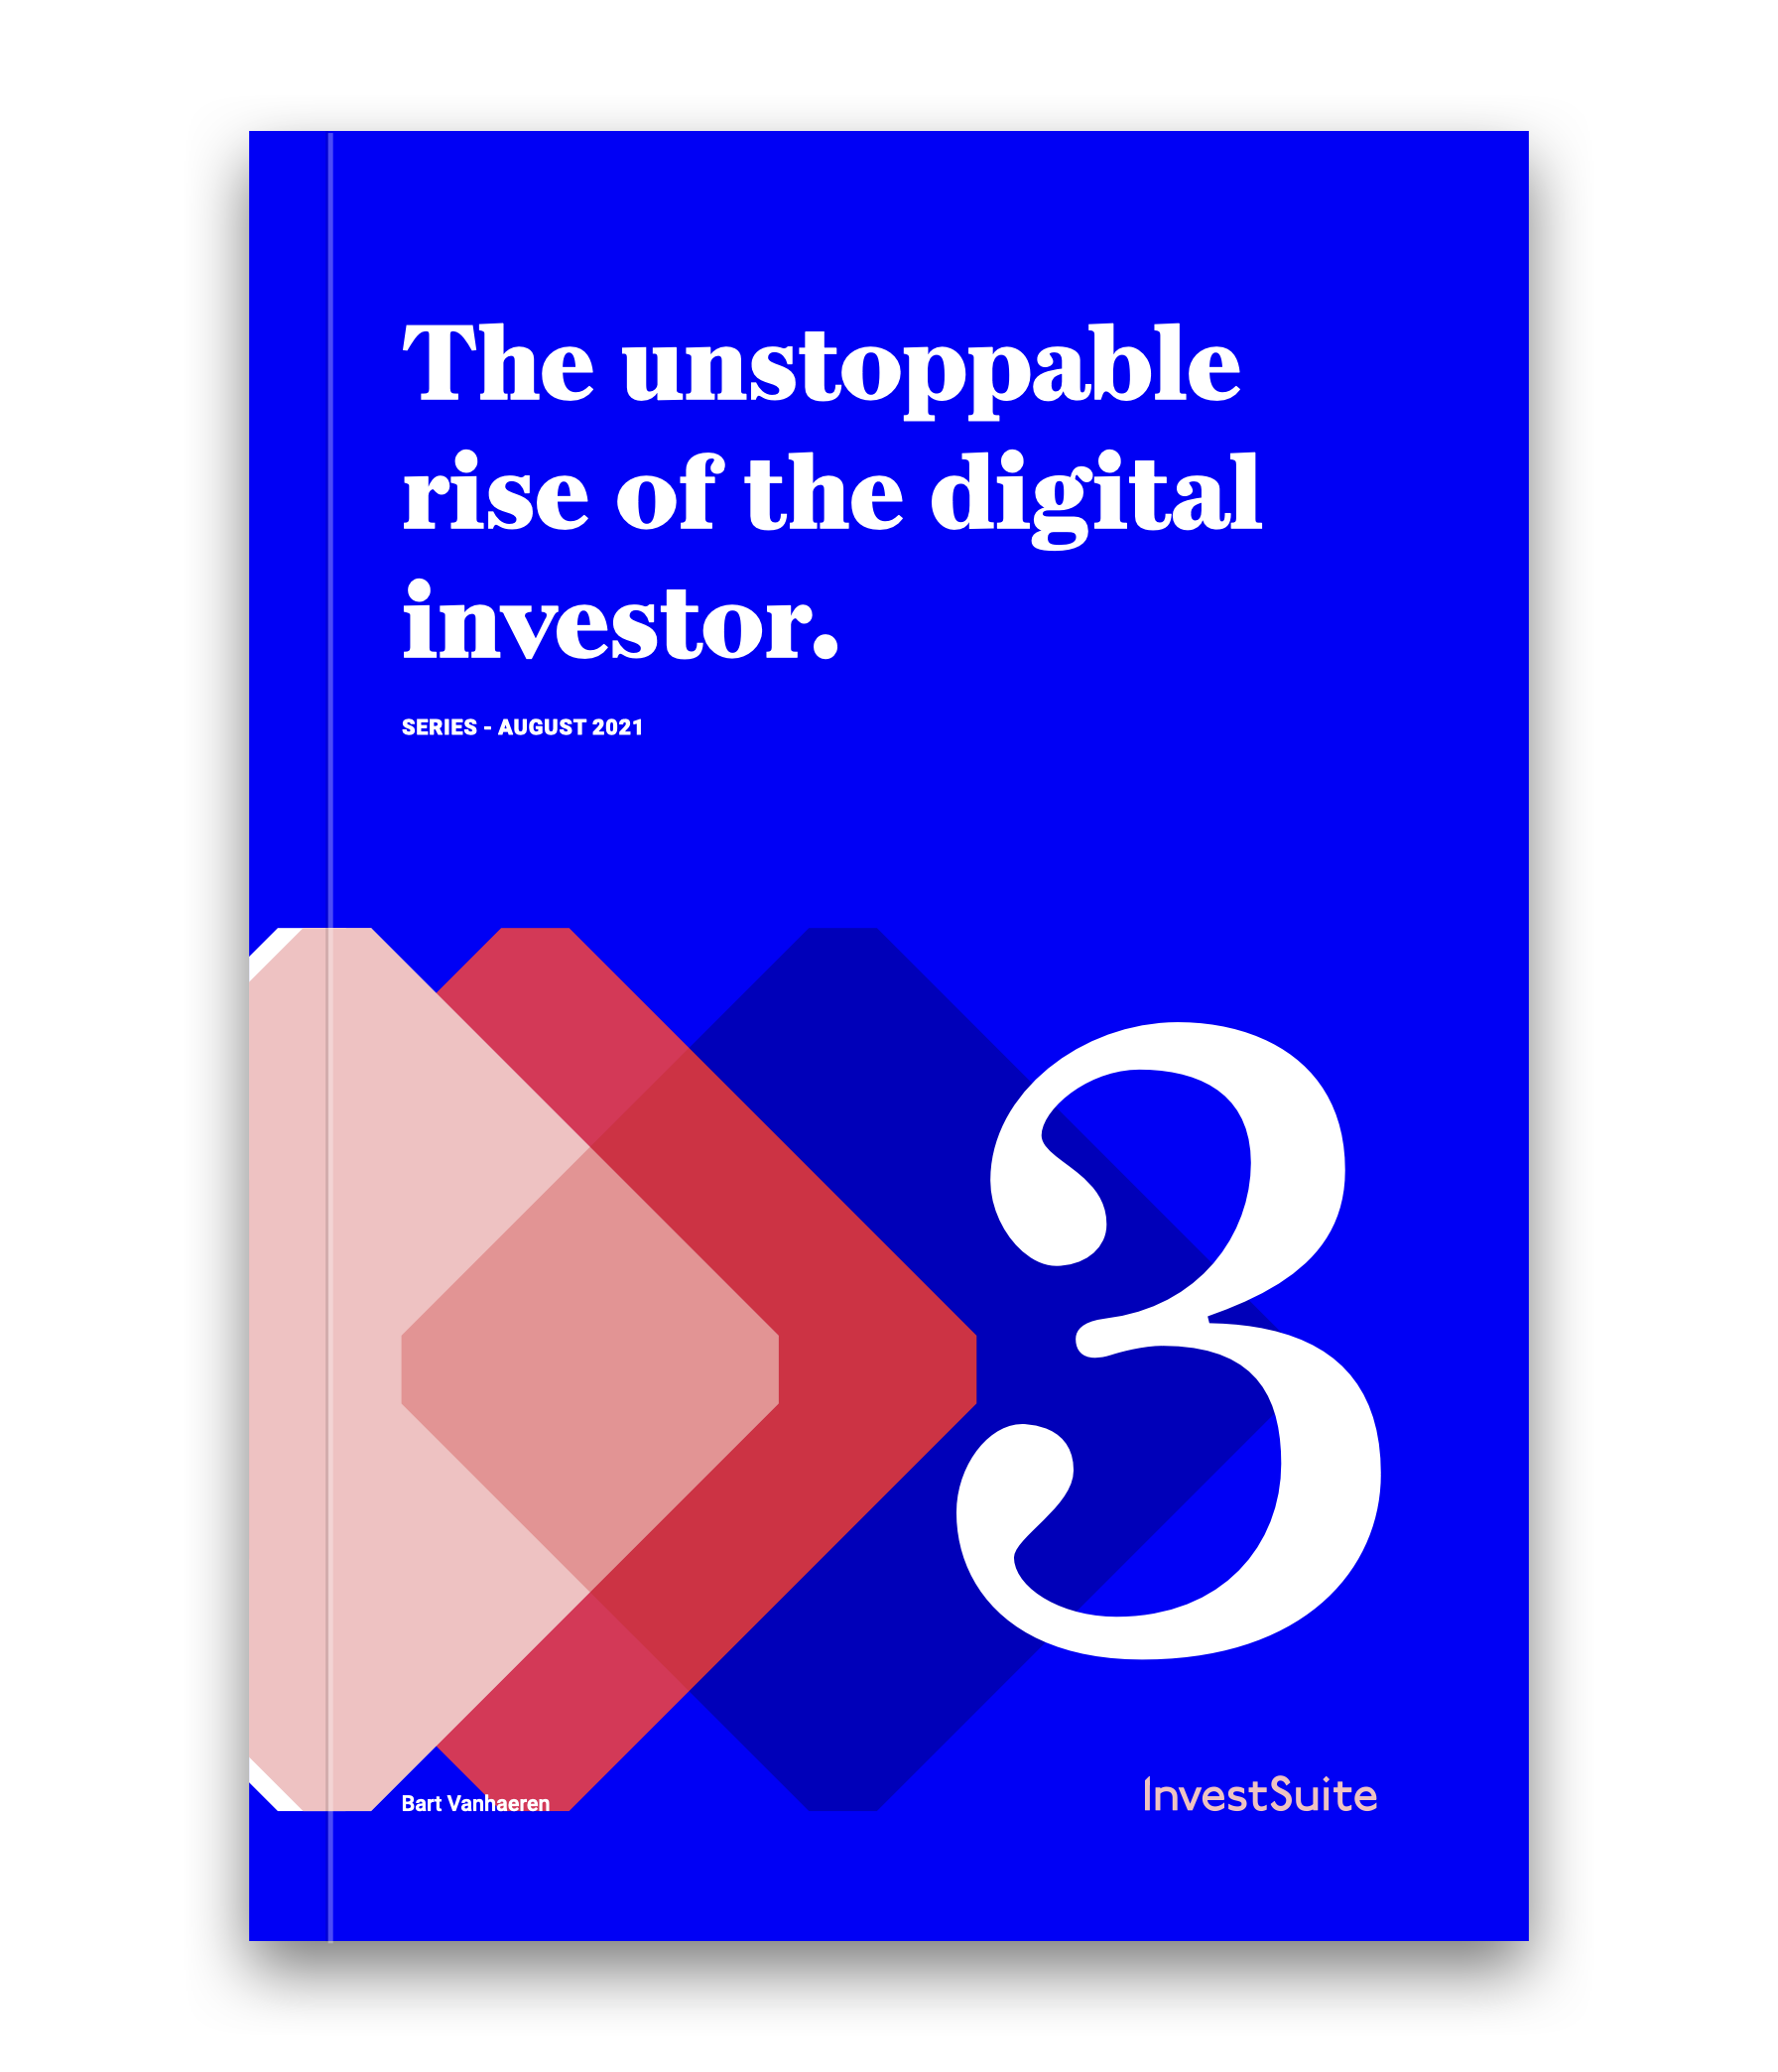 Digital Investor Series - The unstoppable rise of the digital investor 3